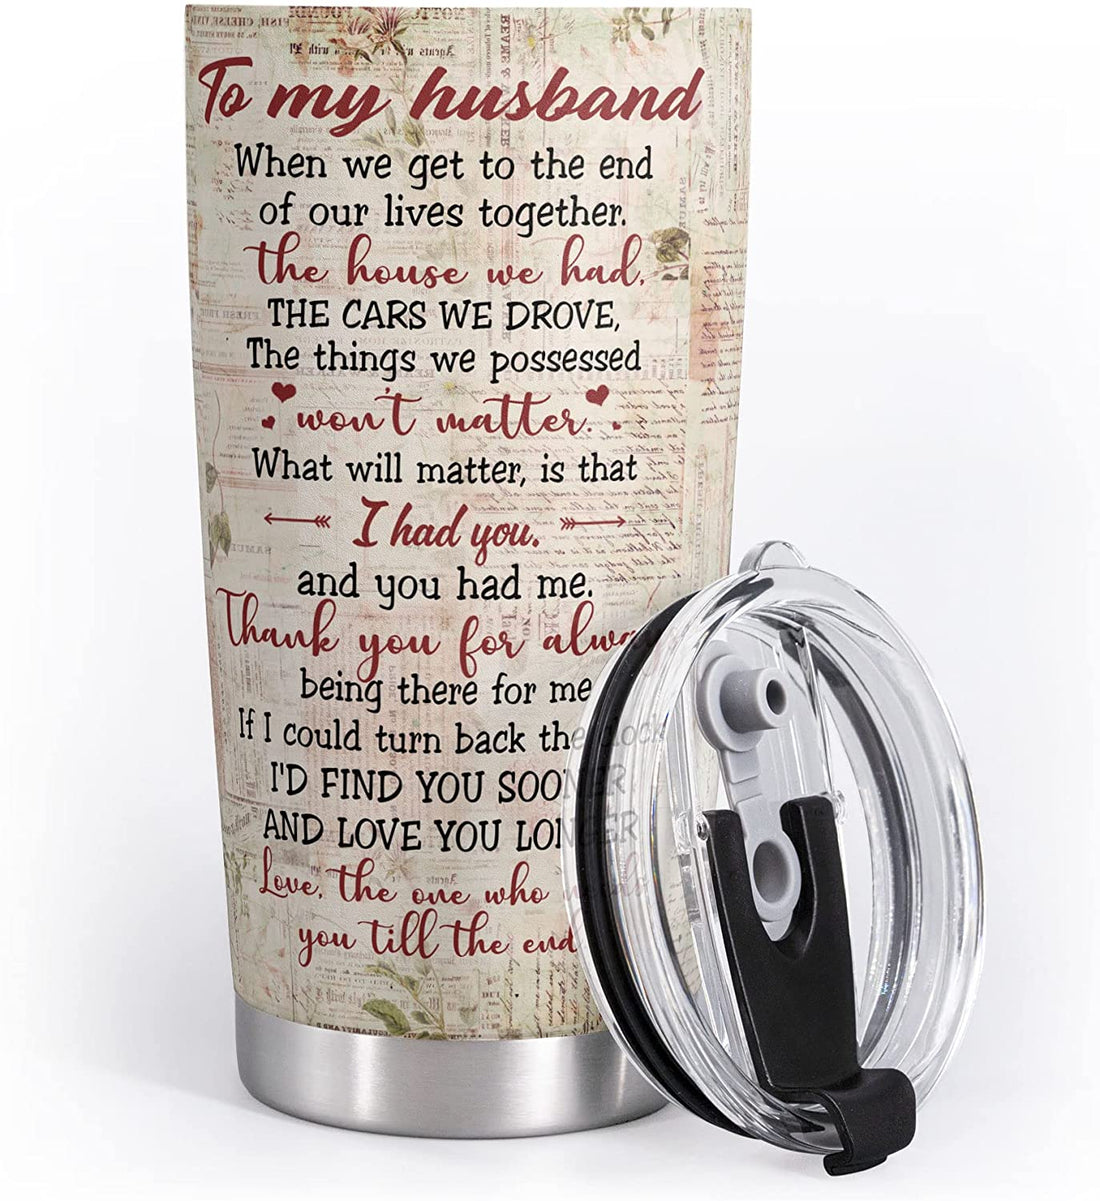 To my husband tumbler - Birthday Gift for Husband from wife & Anniversary Present for Him